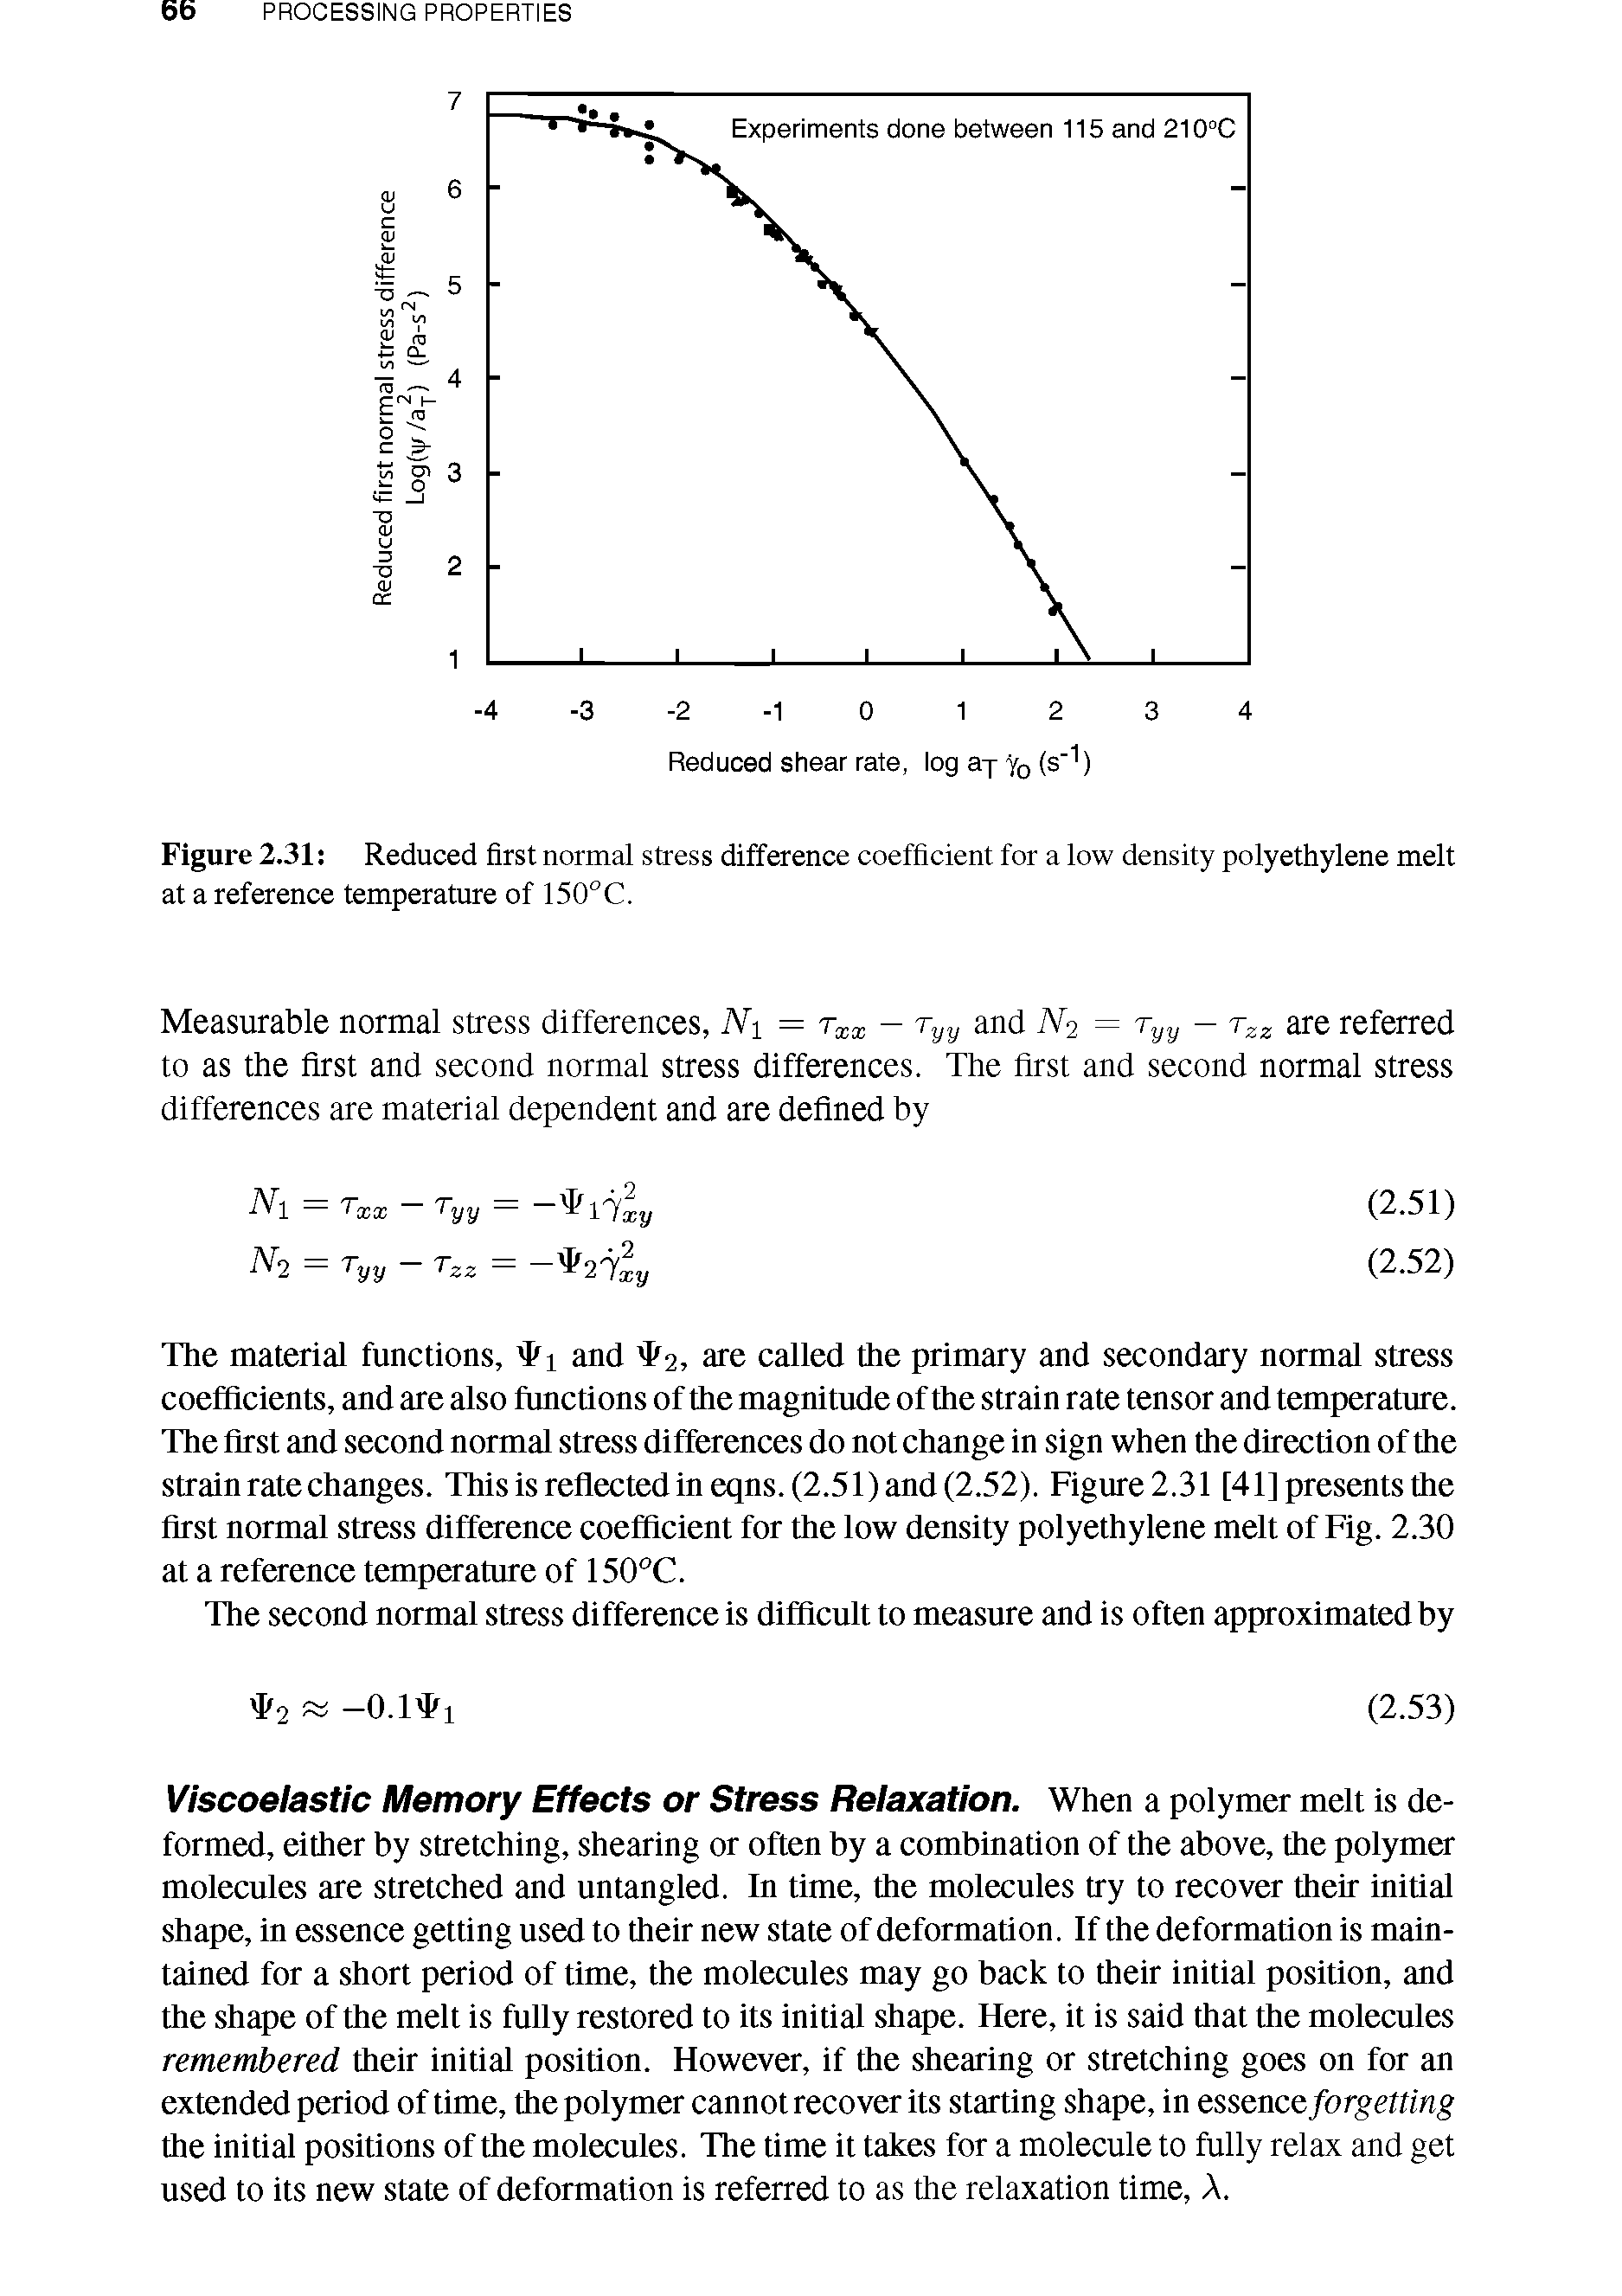 Figure 2.31 Reduced first normal stress difference coefficient for a low density polyethylene melt at a reference temperature of 150°C.